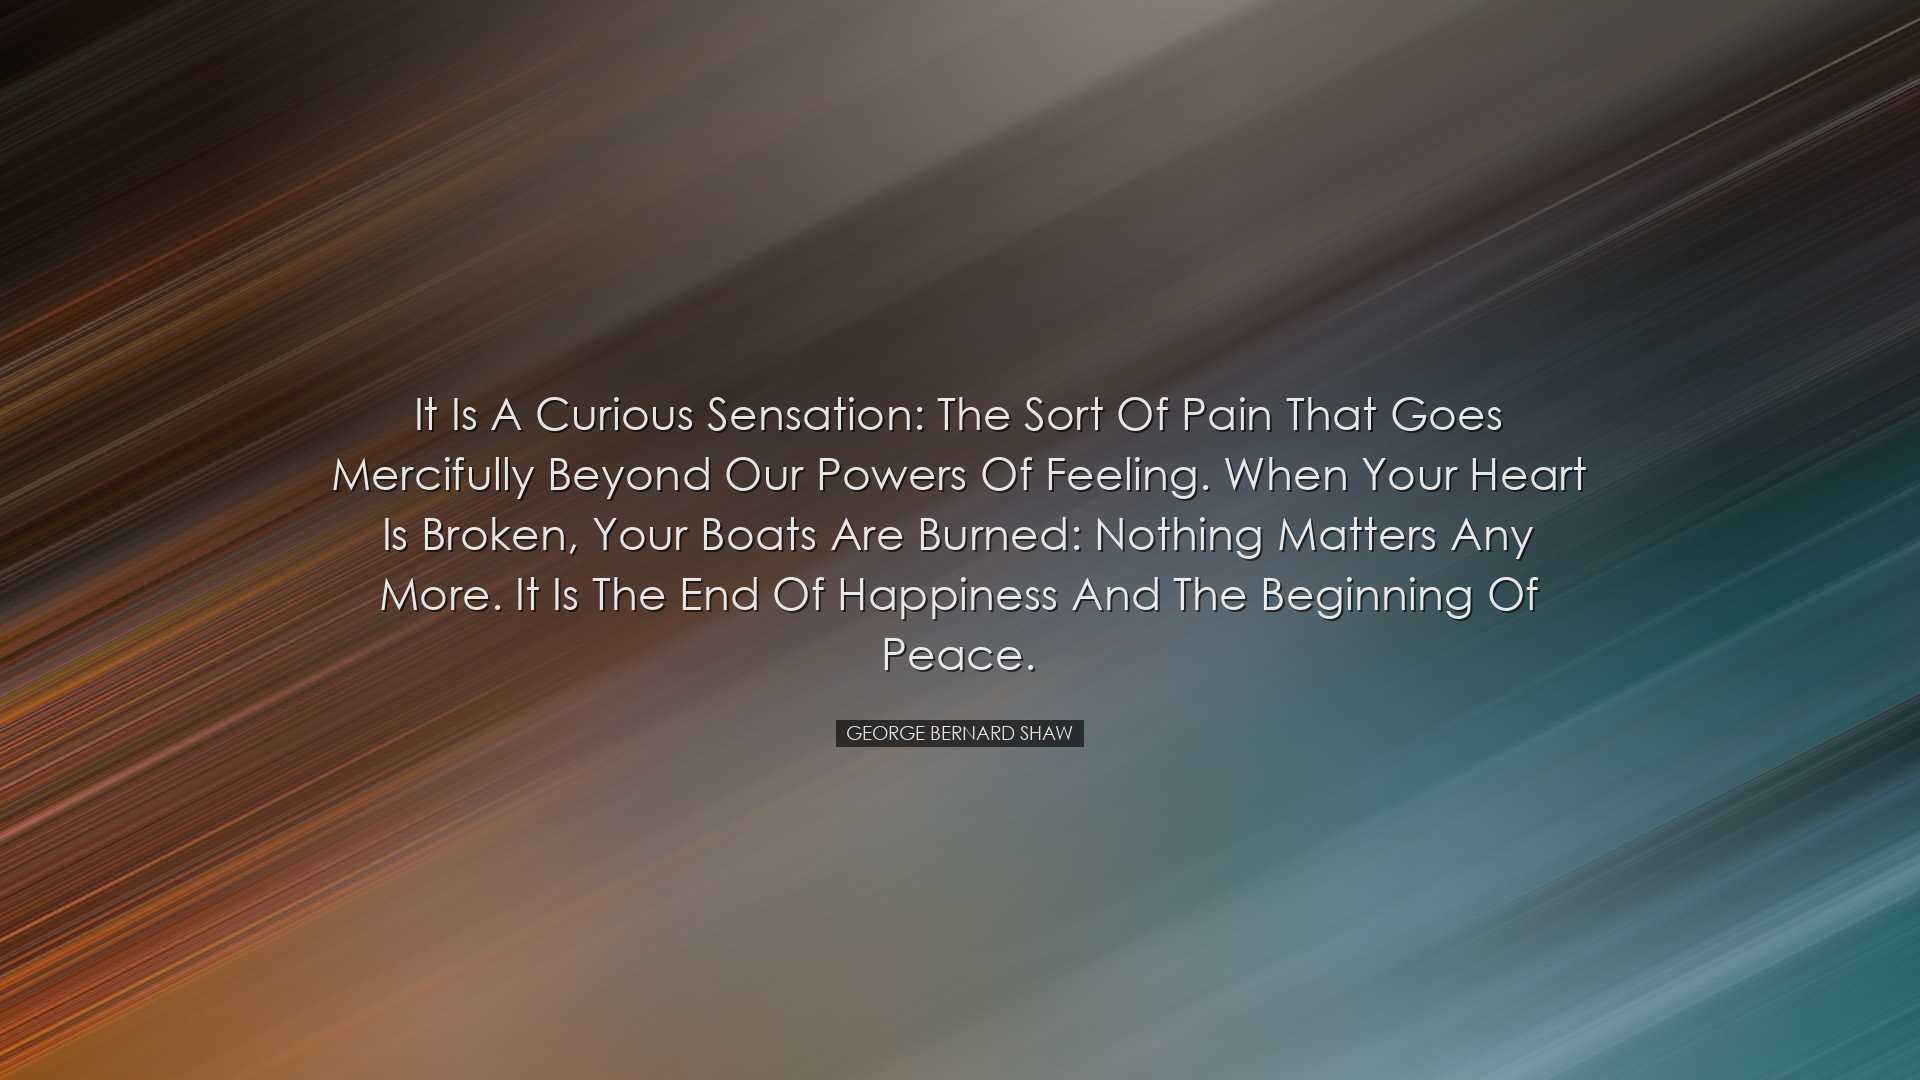 It is a curious sensation: the sort of pain that goes mercifully b